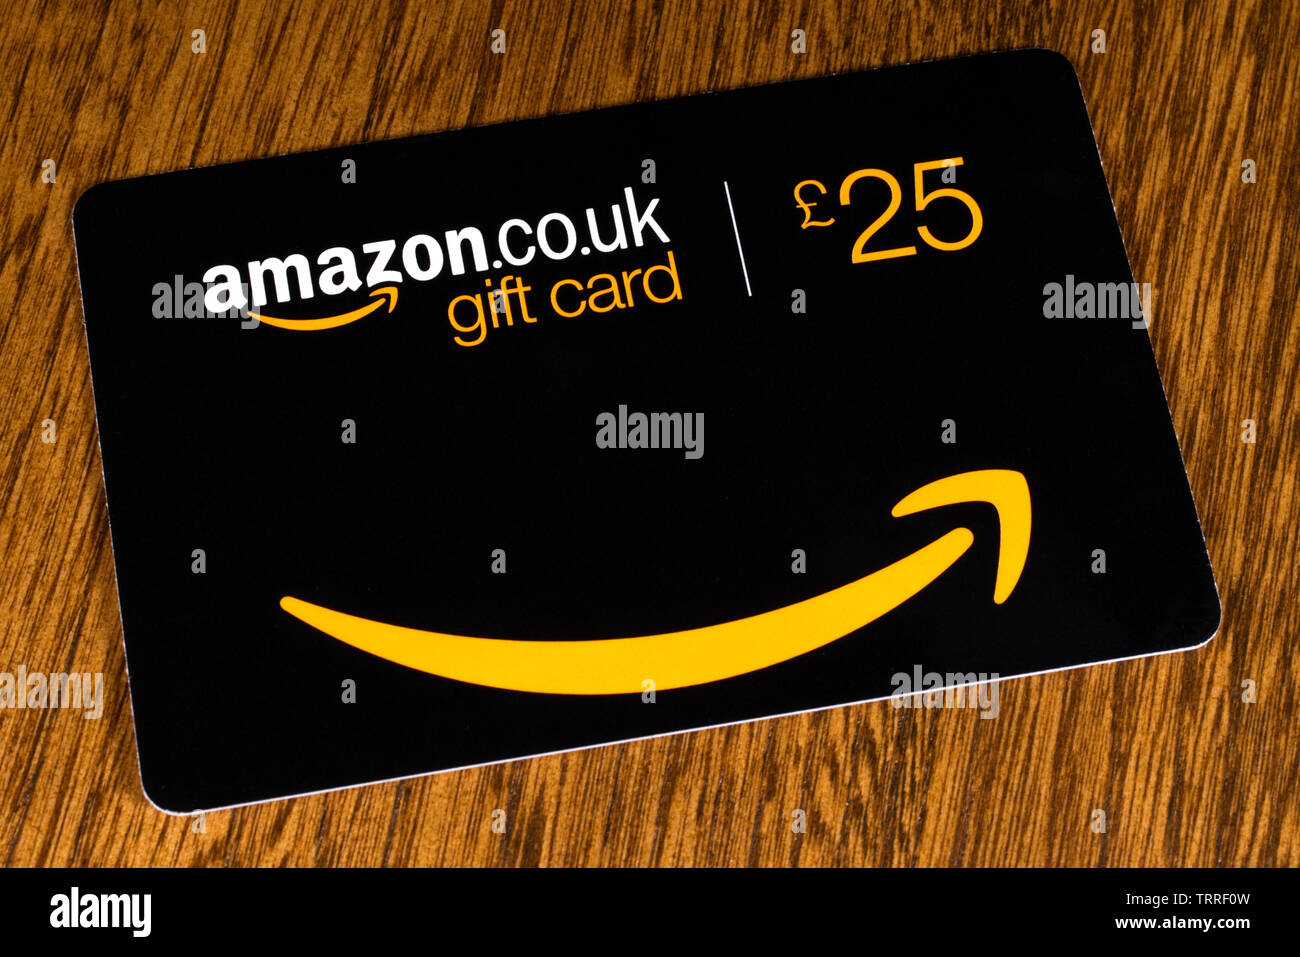 London, UK - June 11th 2019: An Amazon gift card for £25 pictured on a  wooden surface Stock Photo - Alamy